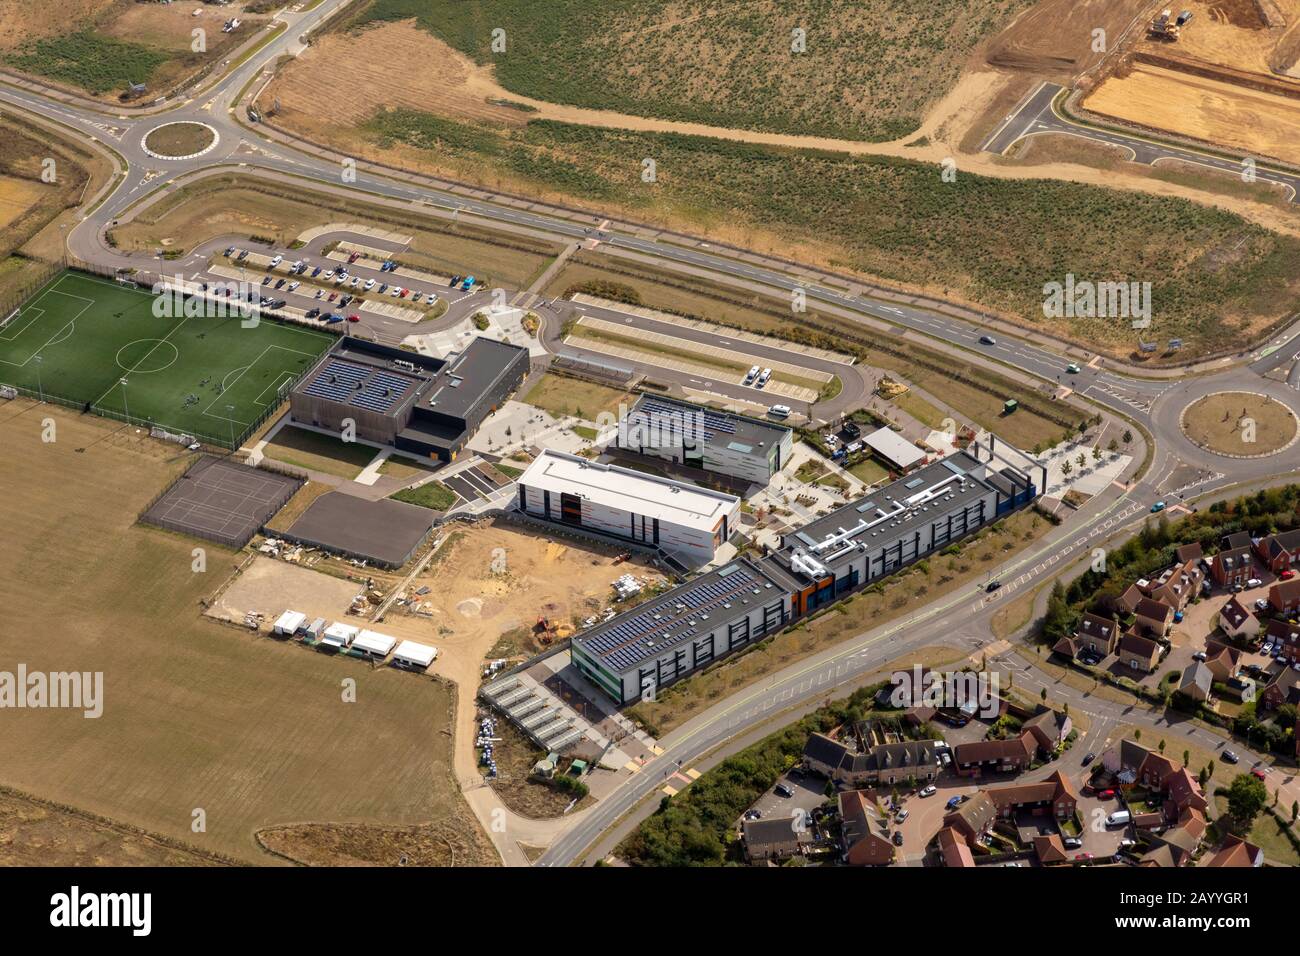 Sybil Andrews Academy and Skyliner Sports Centre, aerial view, at Bury St Edmunds, Suffolk, UK Stock Photo